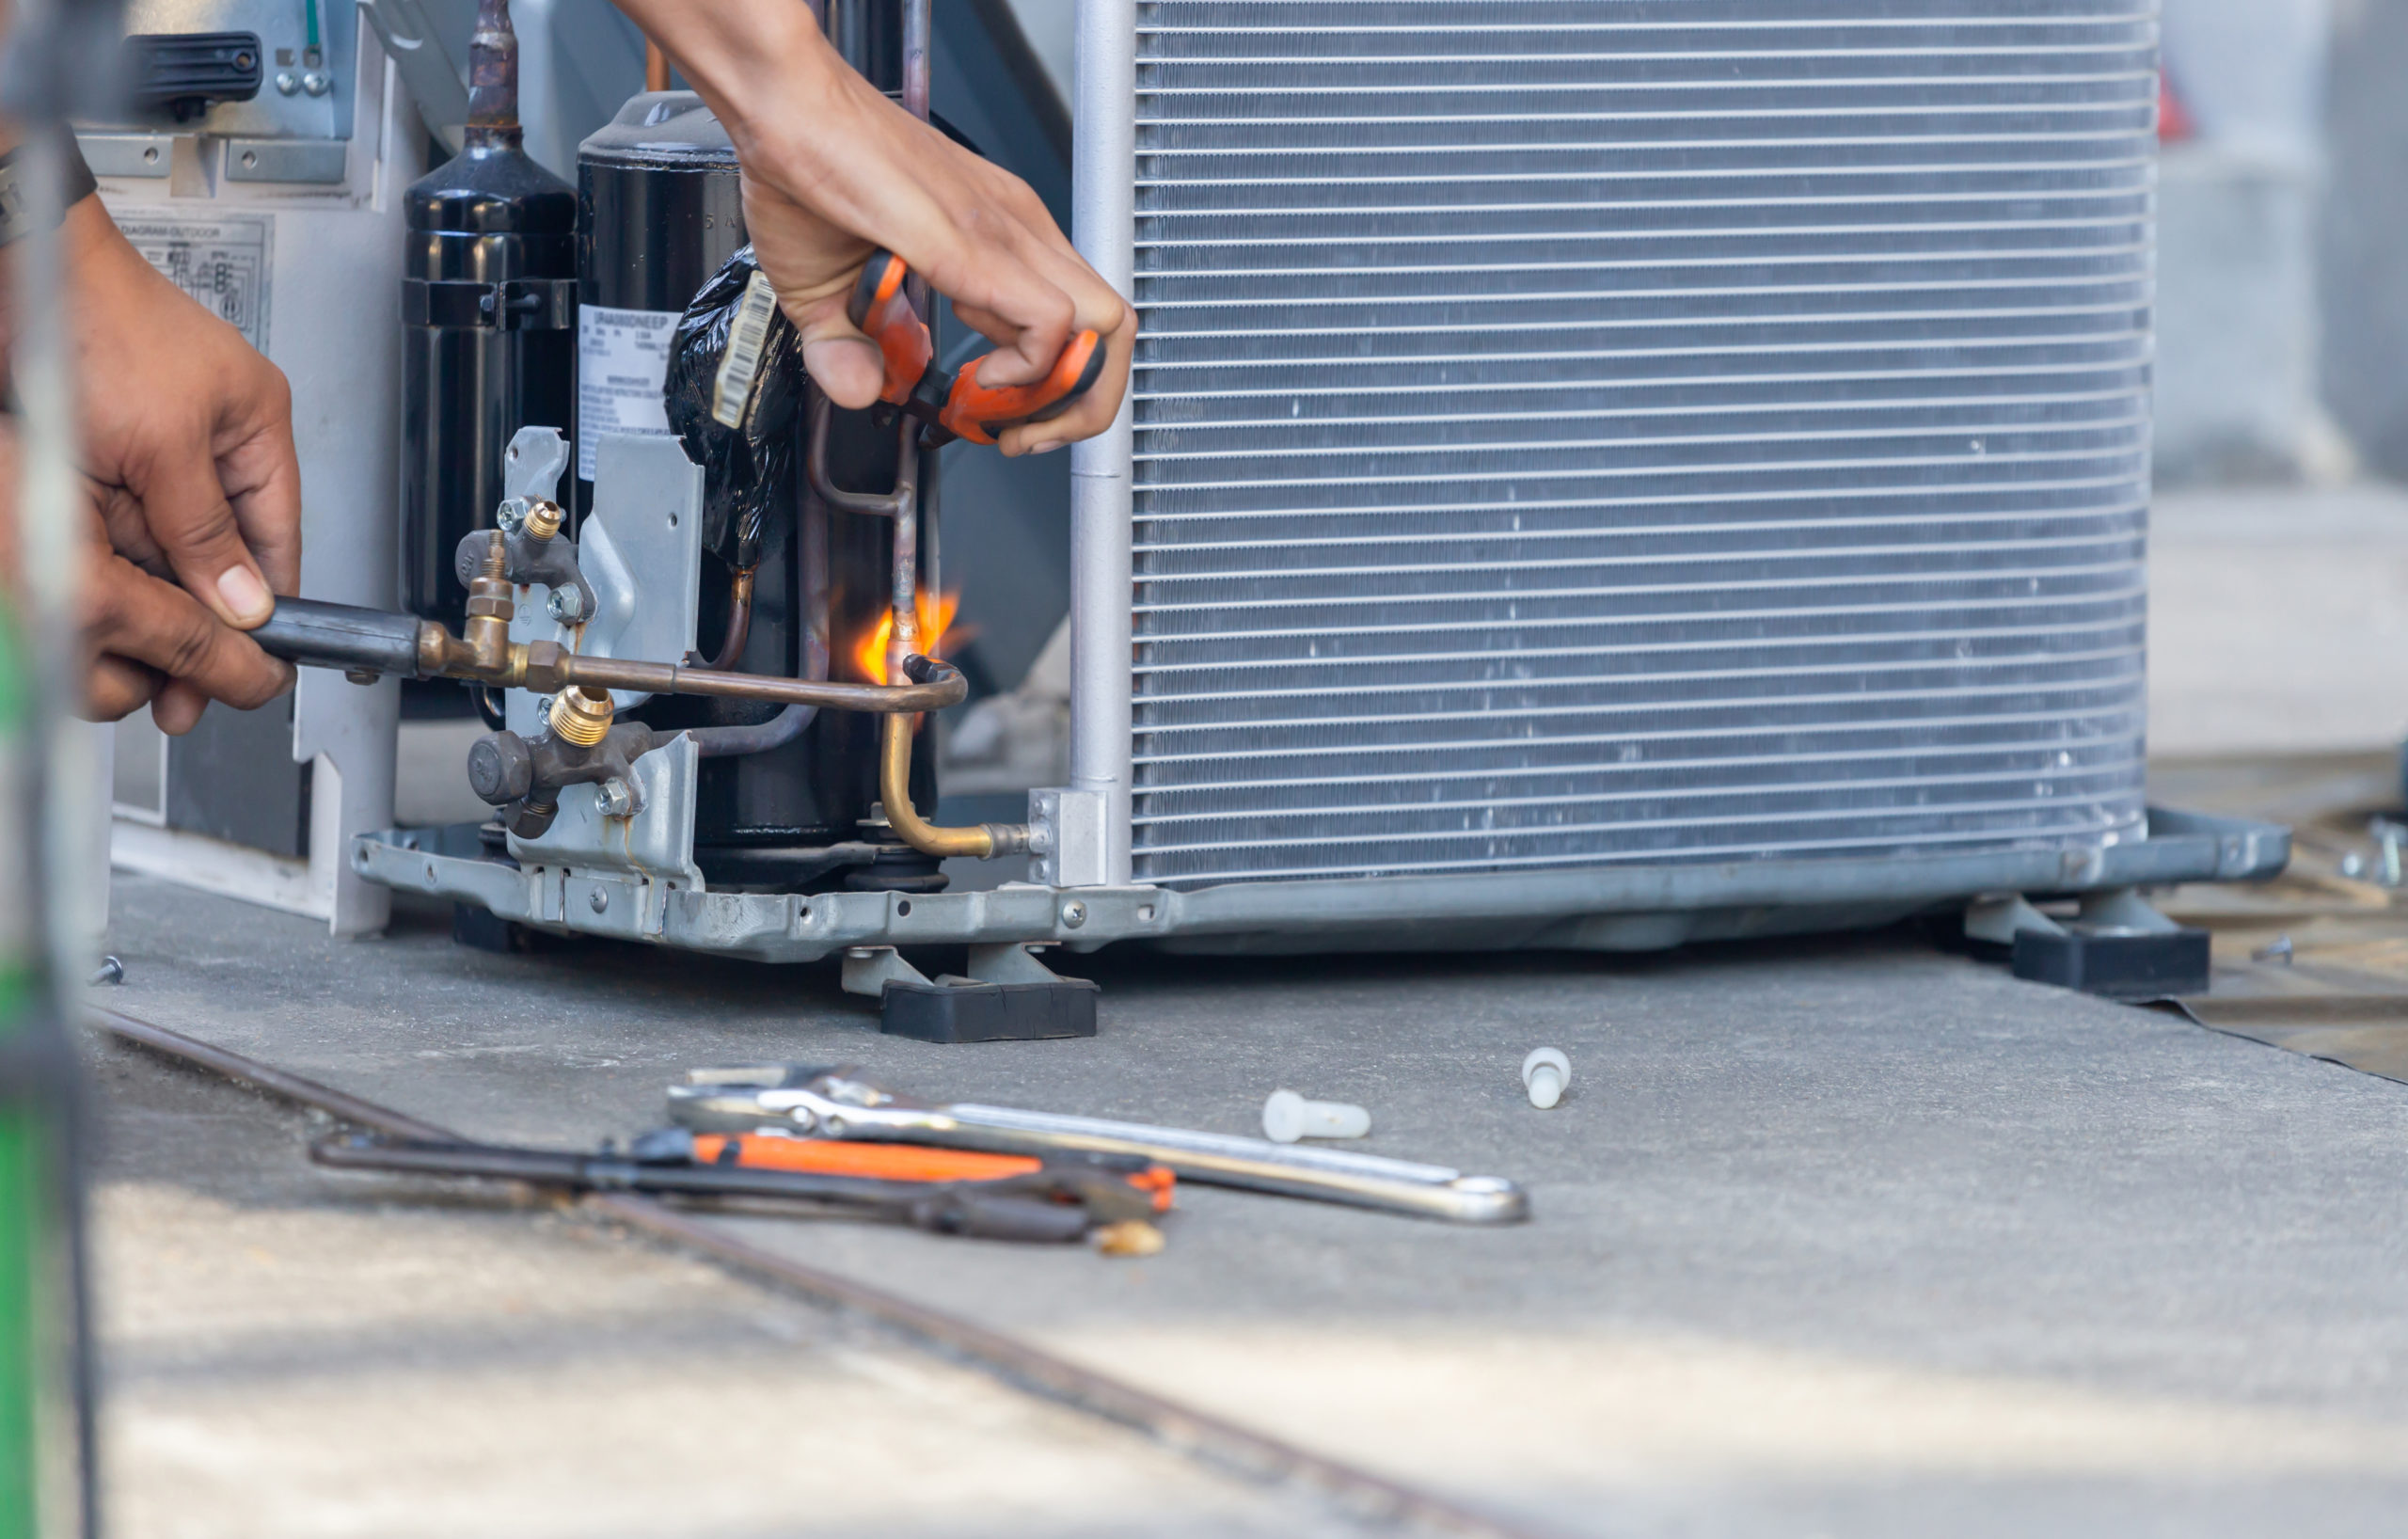 How to Know When It’s Time to Repair or Replace Your Air Conditioner